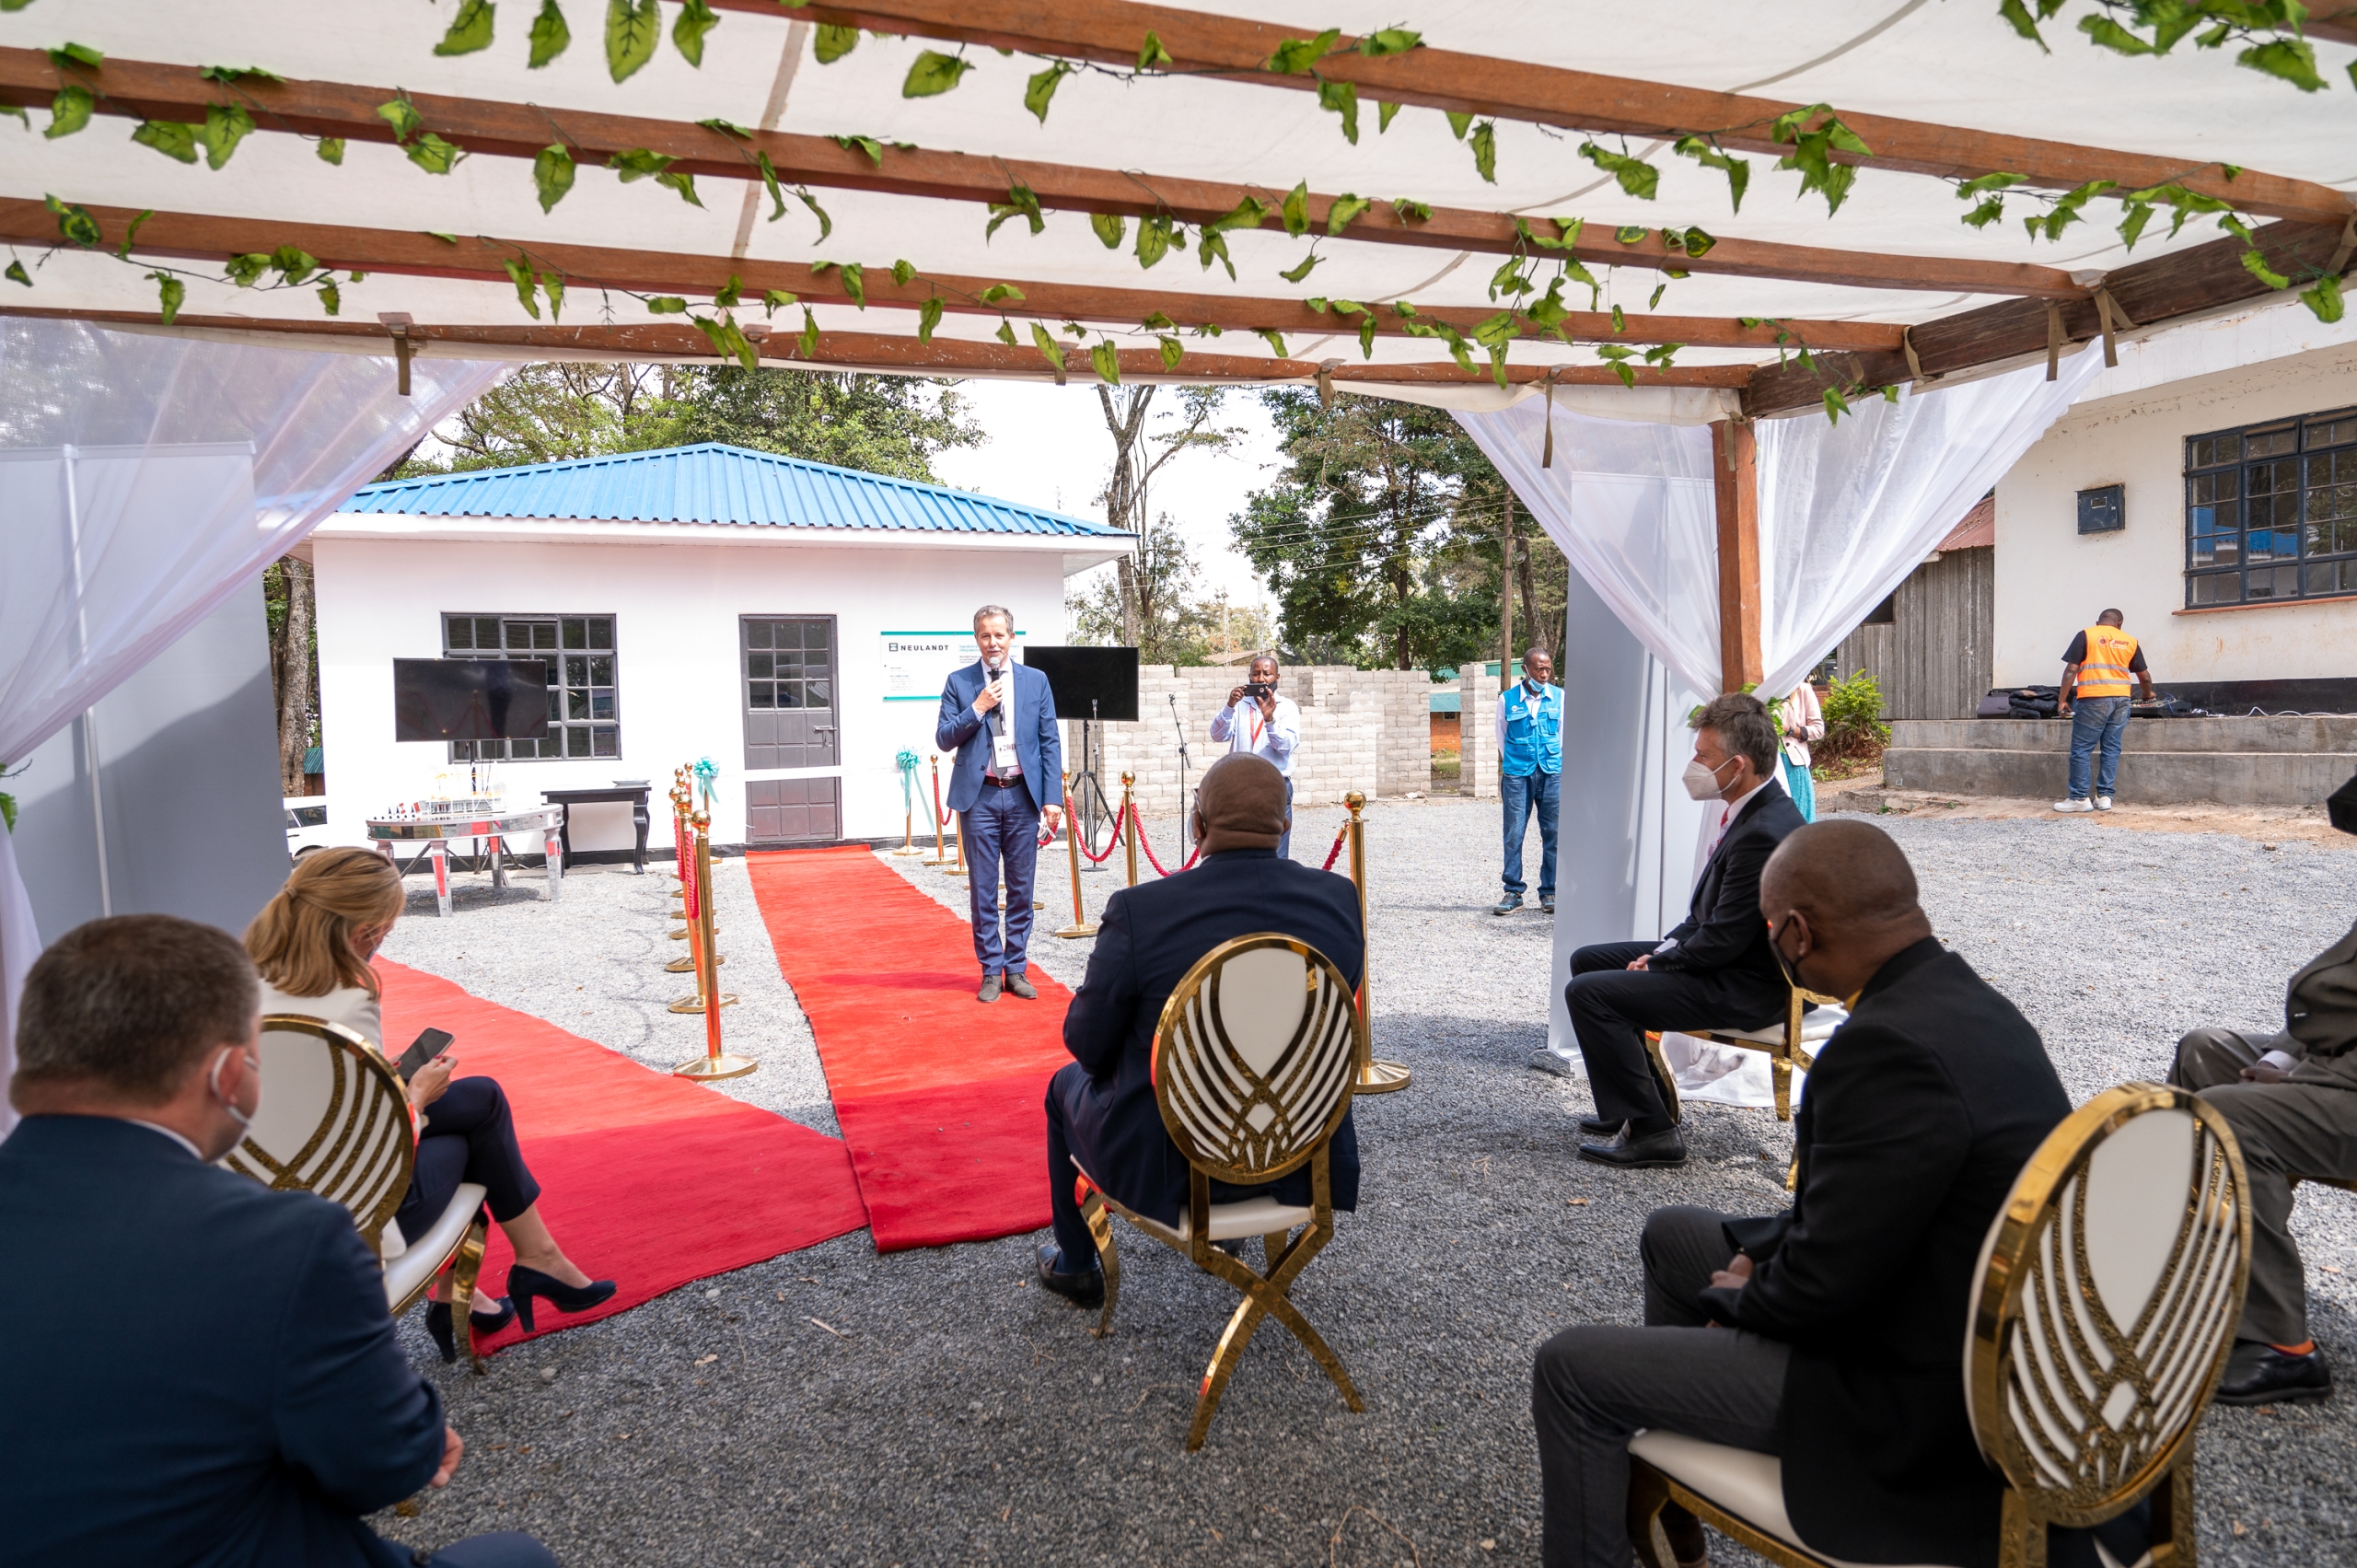 Crowd of business people is sitting on chairs under a pavilion while they are watching a business man giving a speech on the red carpet right in front of the show house at the NCA show ground in Kenia